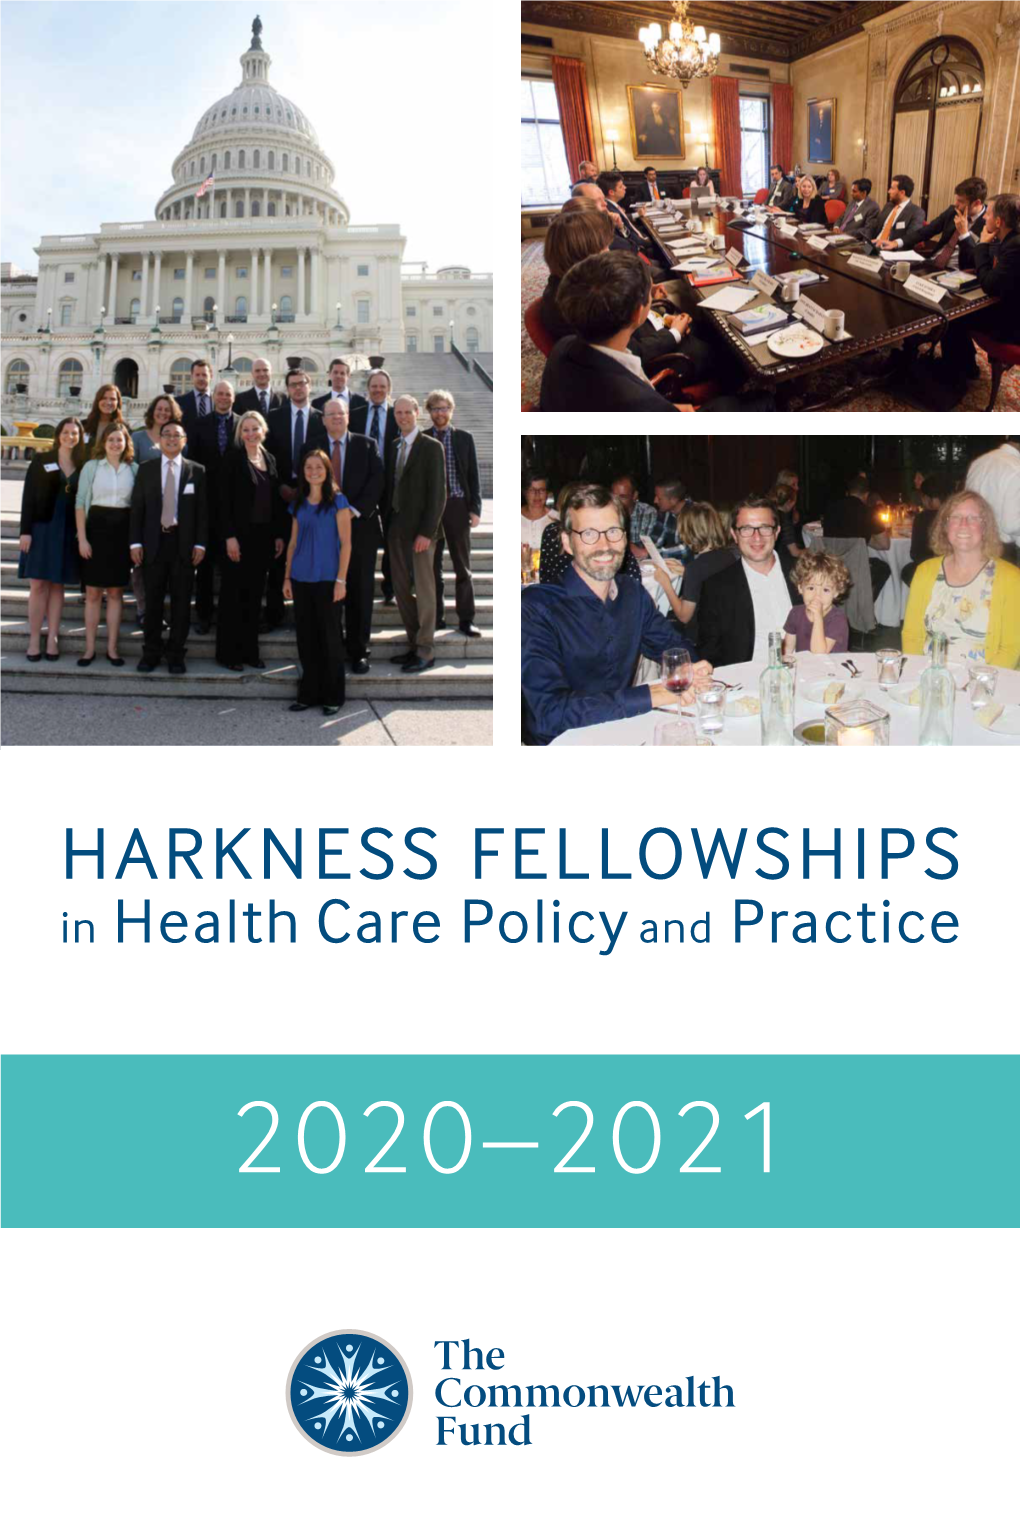 HARKNESS FELLOWSHIPS in Health Care Policy and Practice